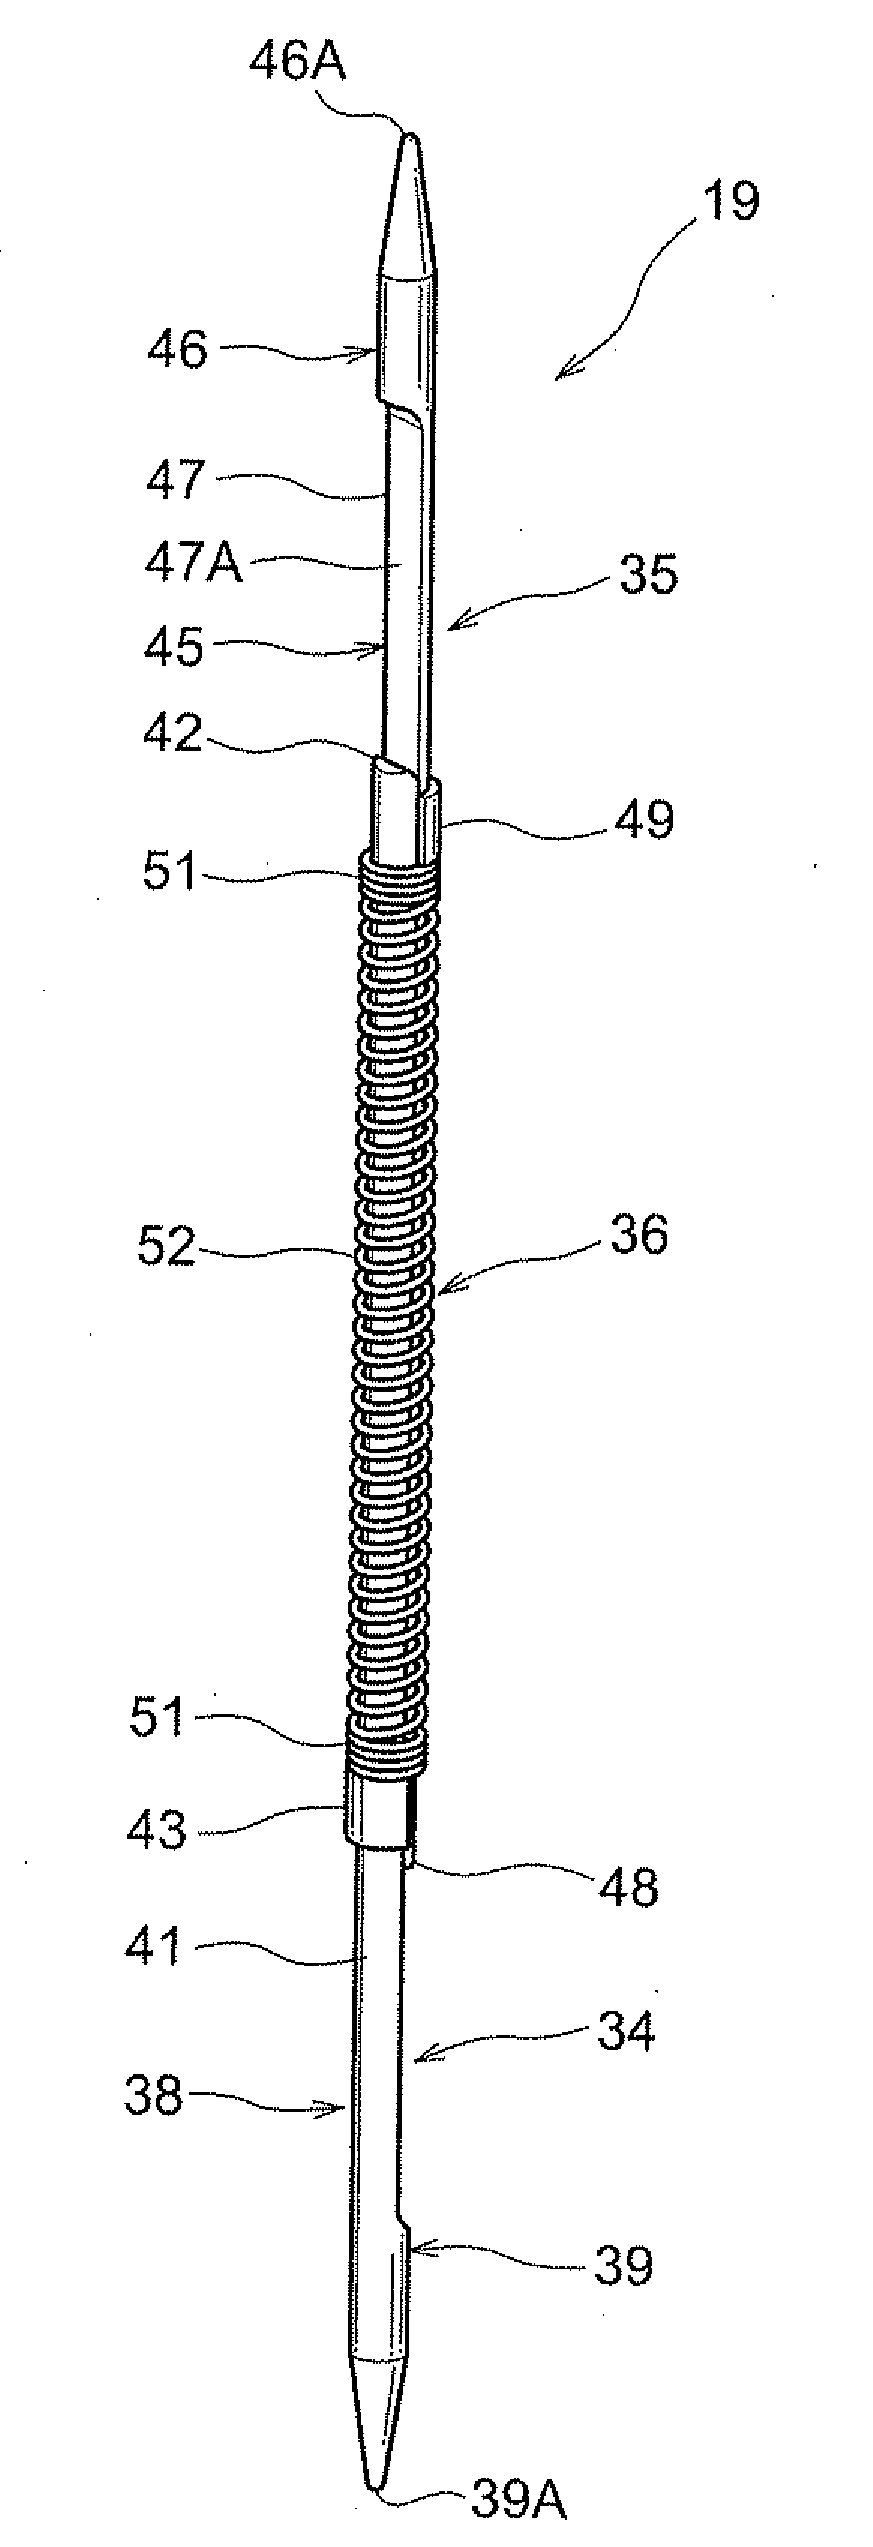 Contact and electrical connecting apparatus